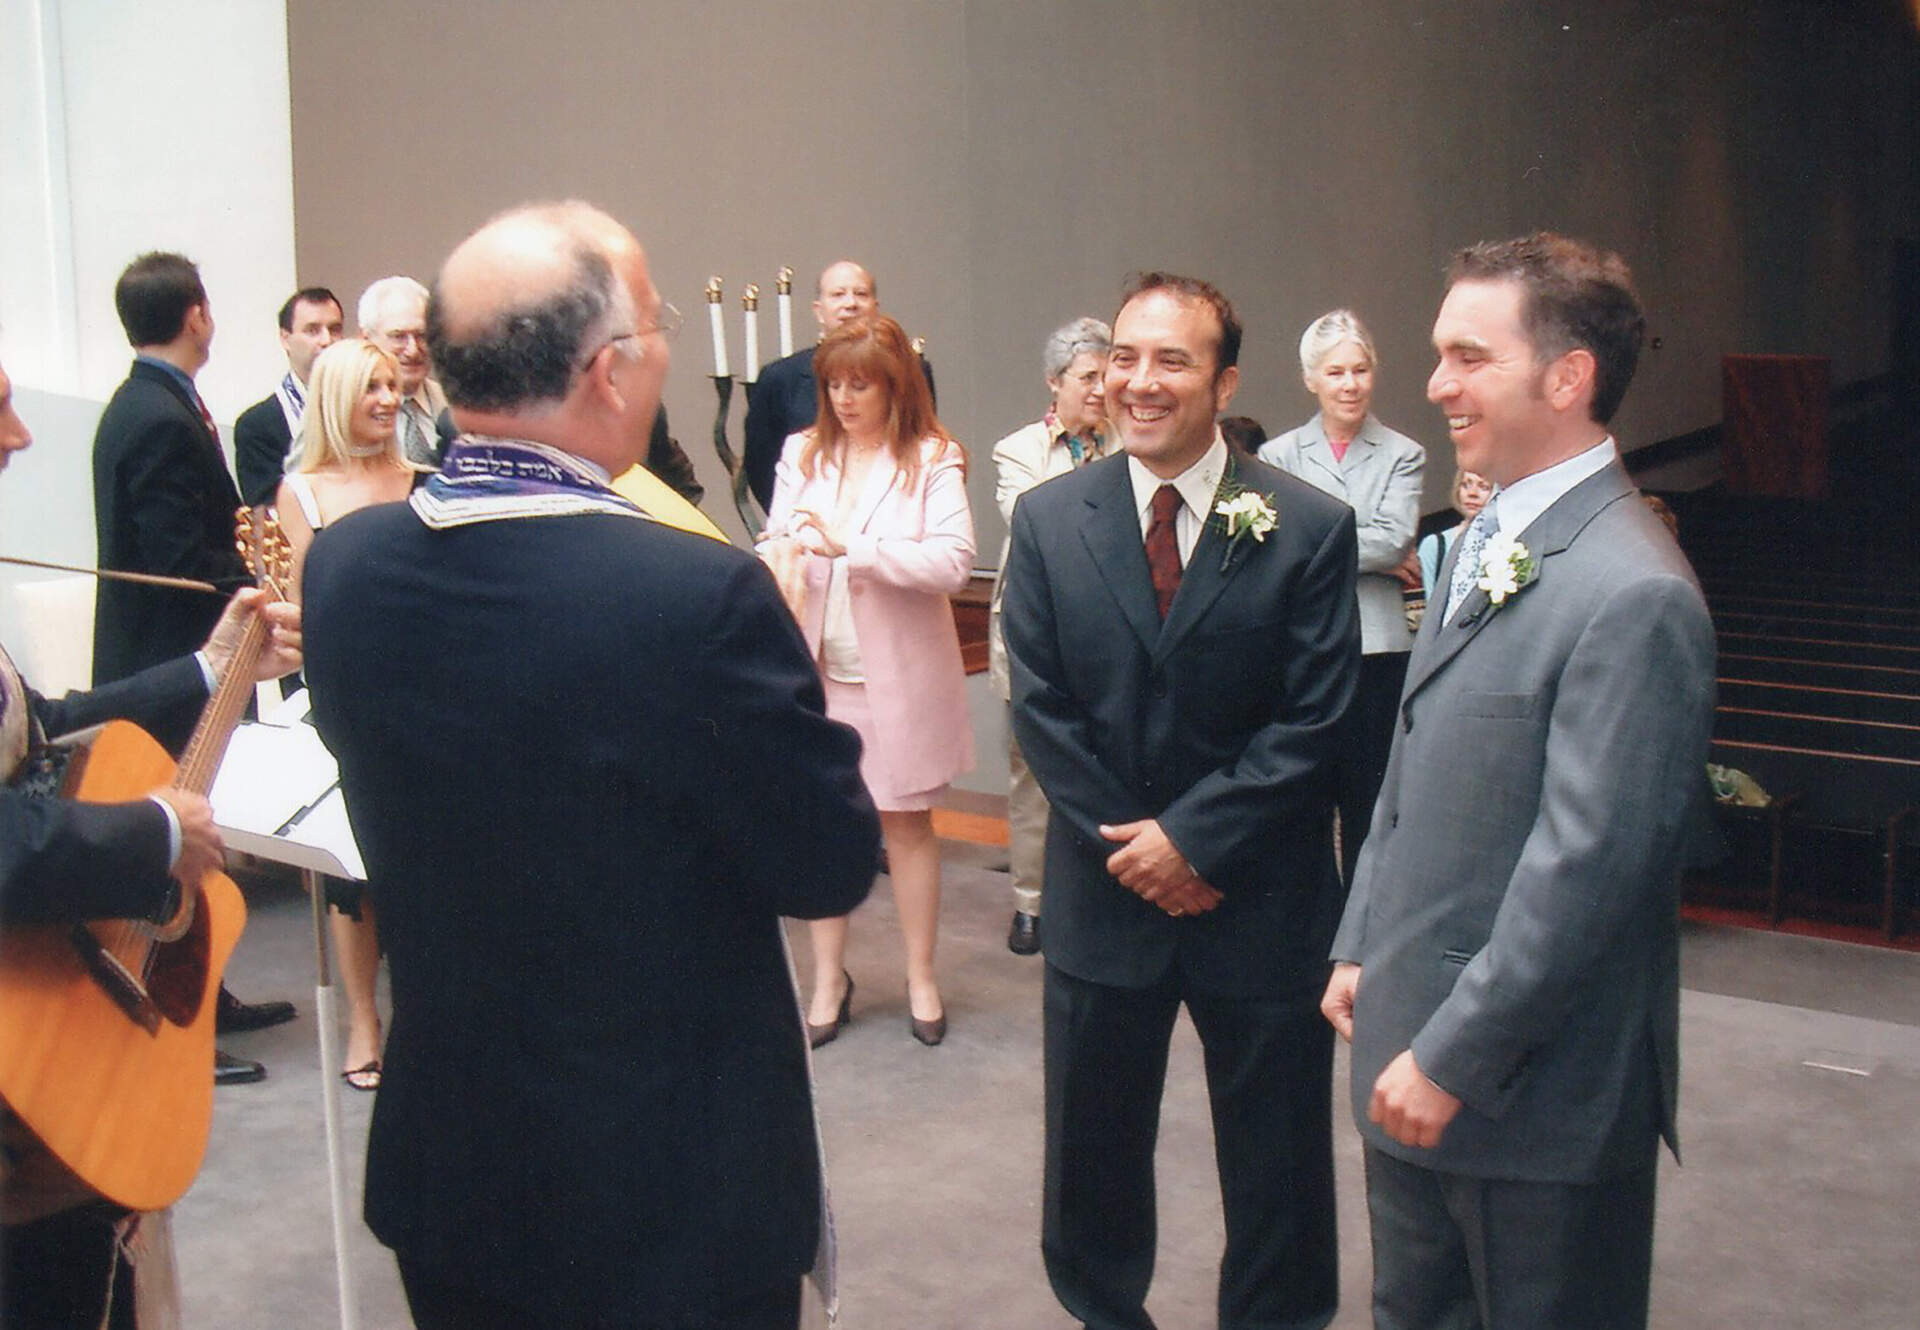 Russ Lopez (center) and Andrew Sherman (right) during their wedding ceremony at Temple Israel in Boston on May 21, 2004. (Courtesy)